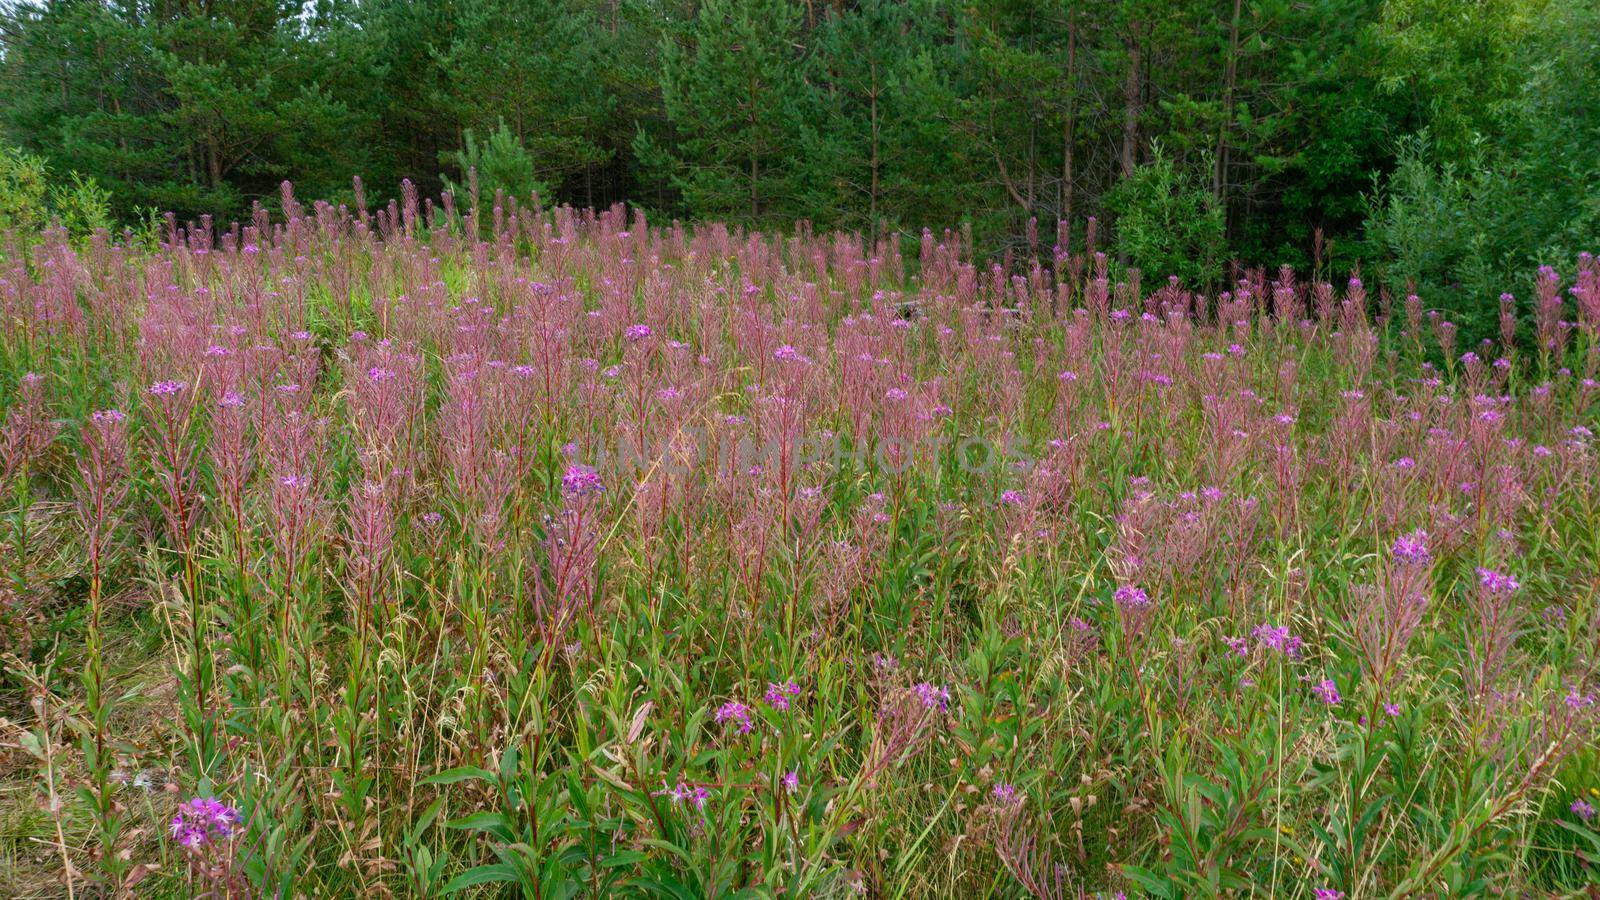 Thickets of fireweed angustifolia willow-herb in the wild. Fireweed does not bloom